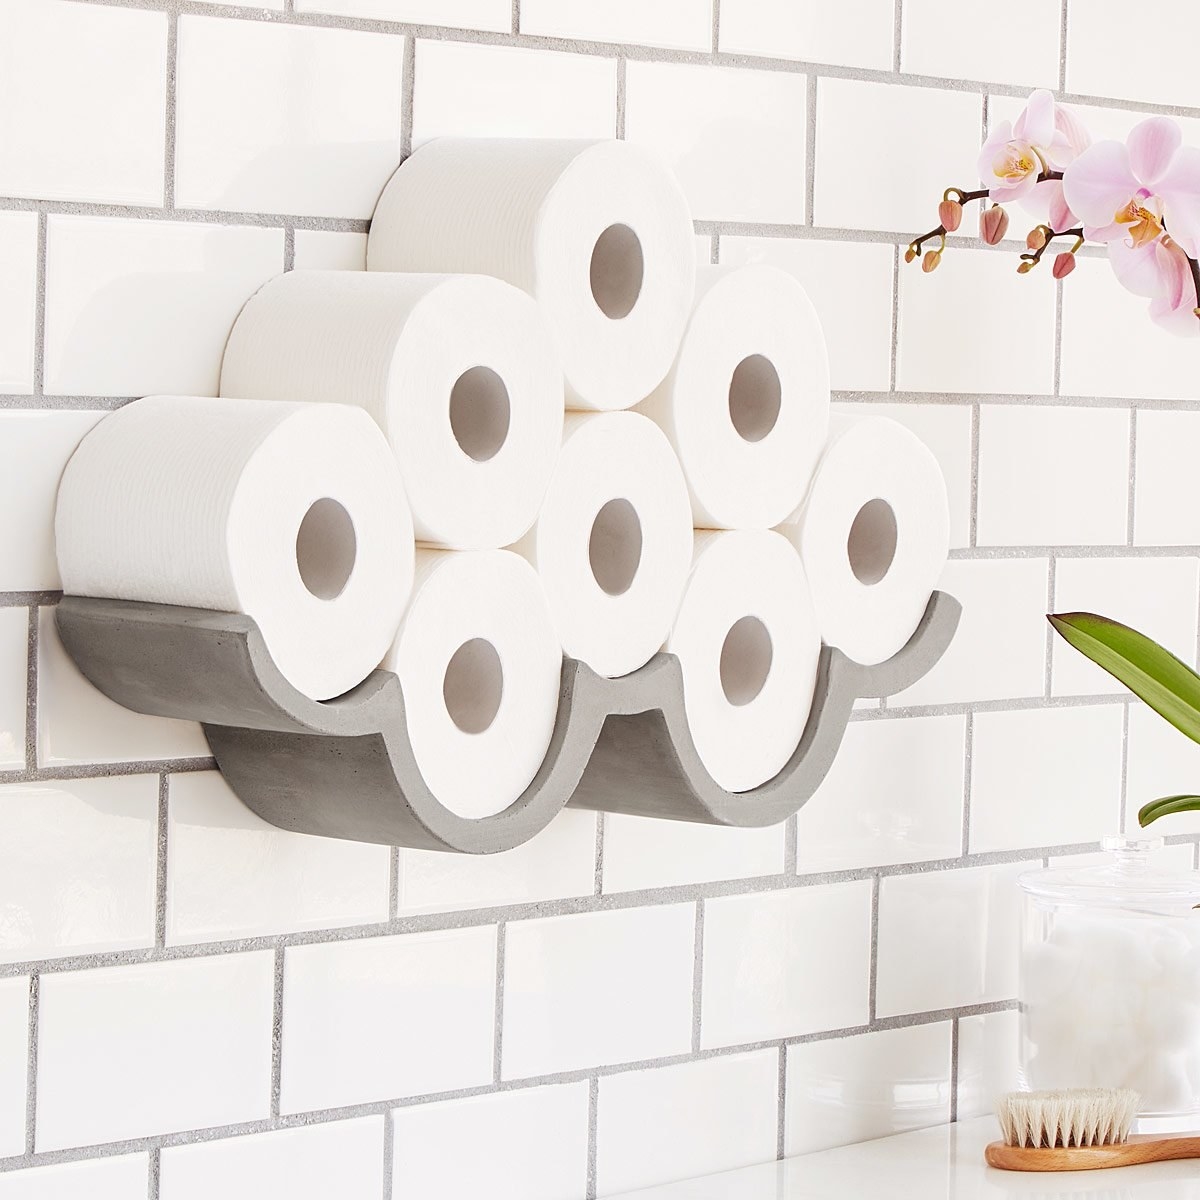 The cloud-shaped wall-mounted shelf with toilet paper rolls on it